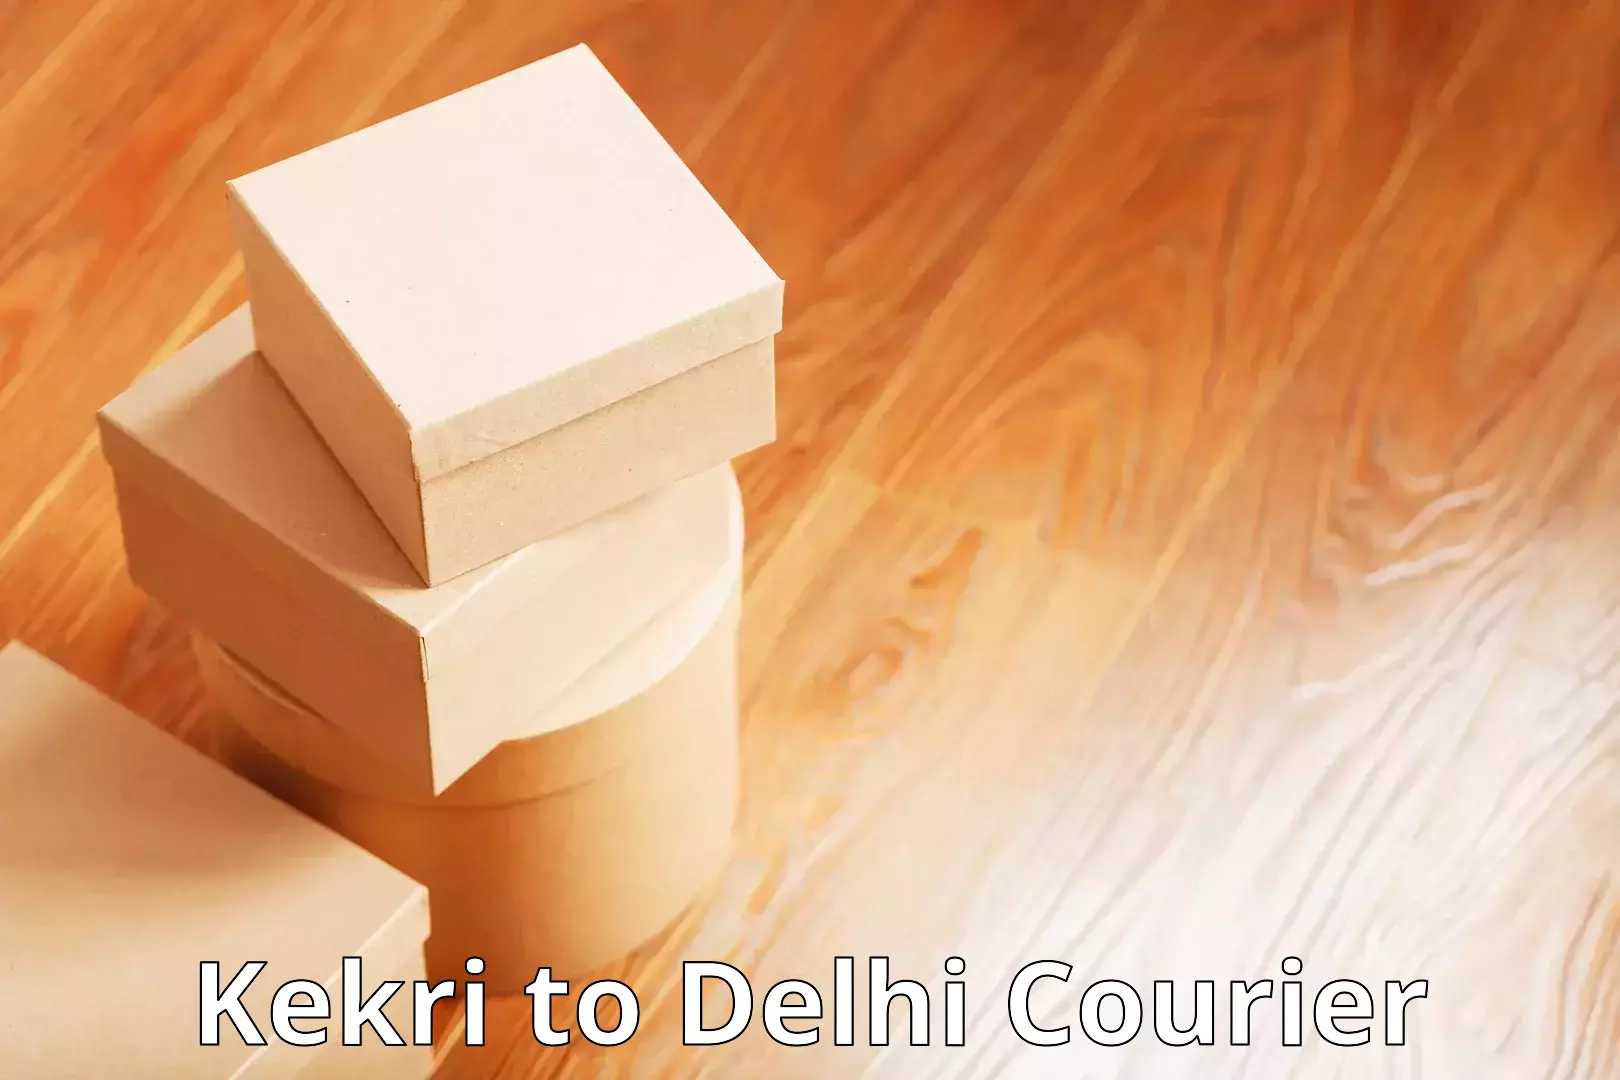 Package delivery network Kekri to Delhi